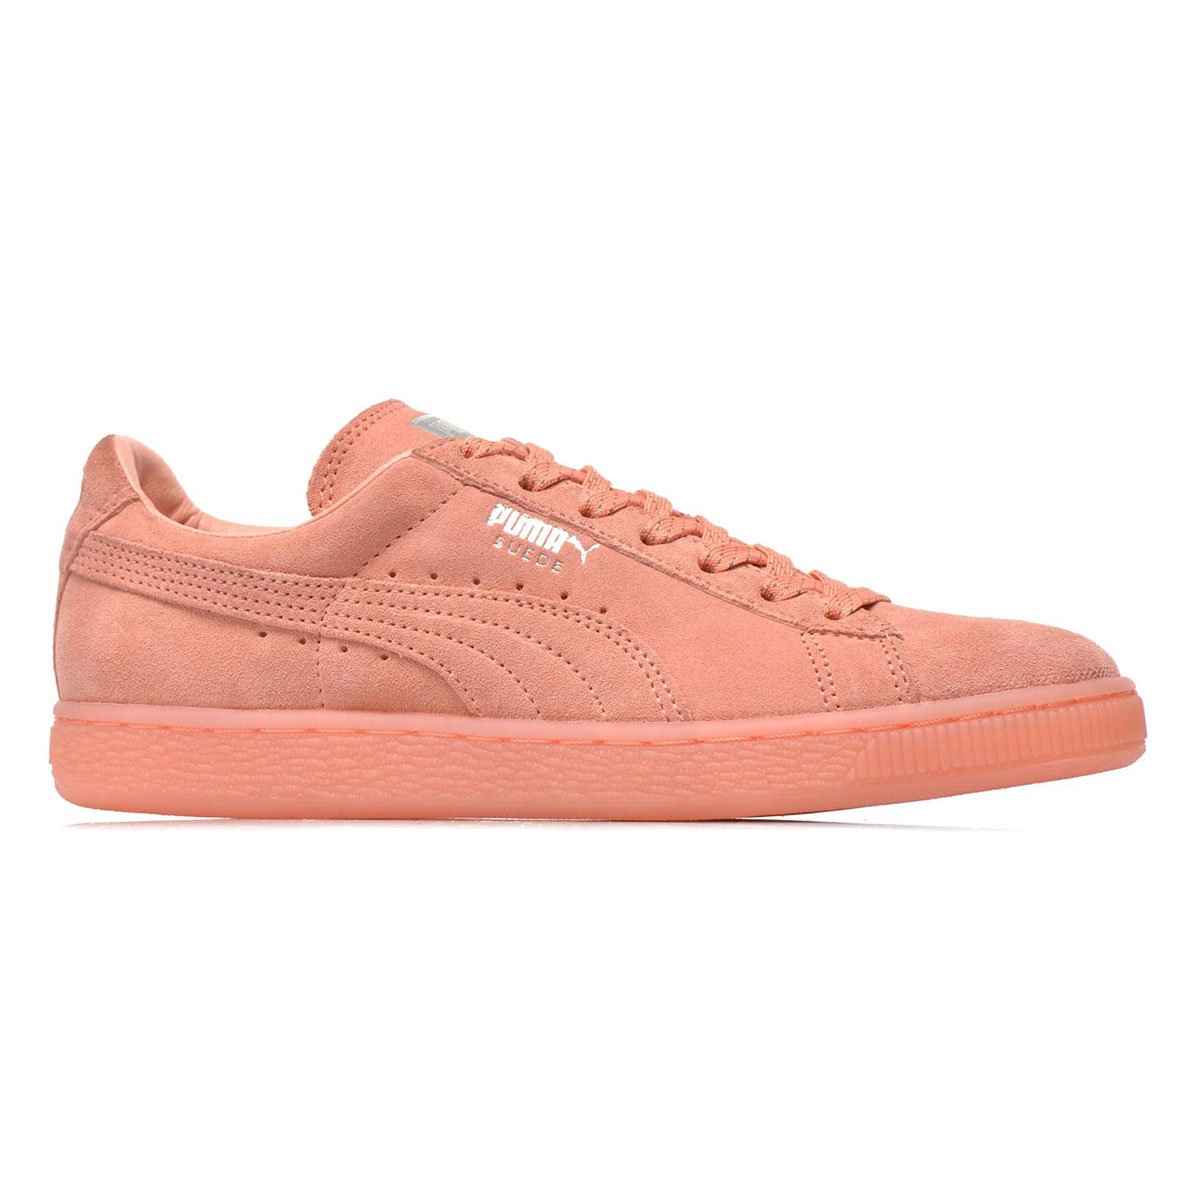 Puma Suede Classic Iced coral  362101-08